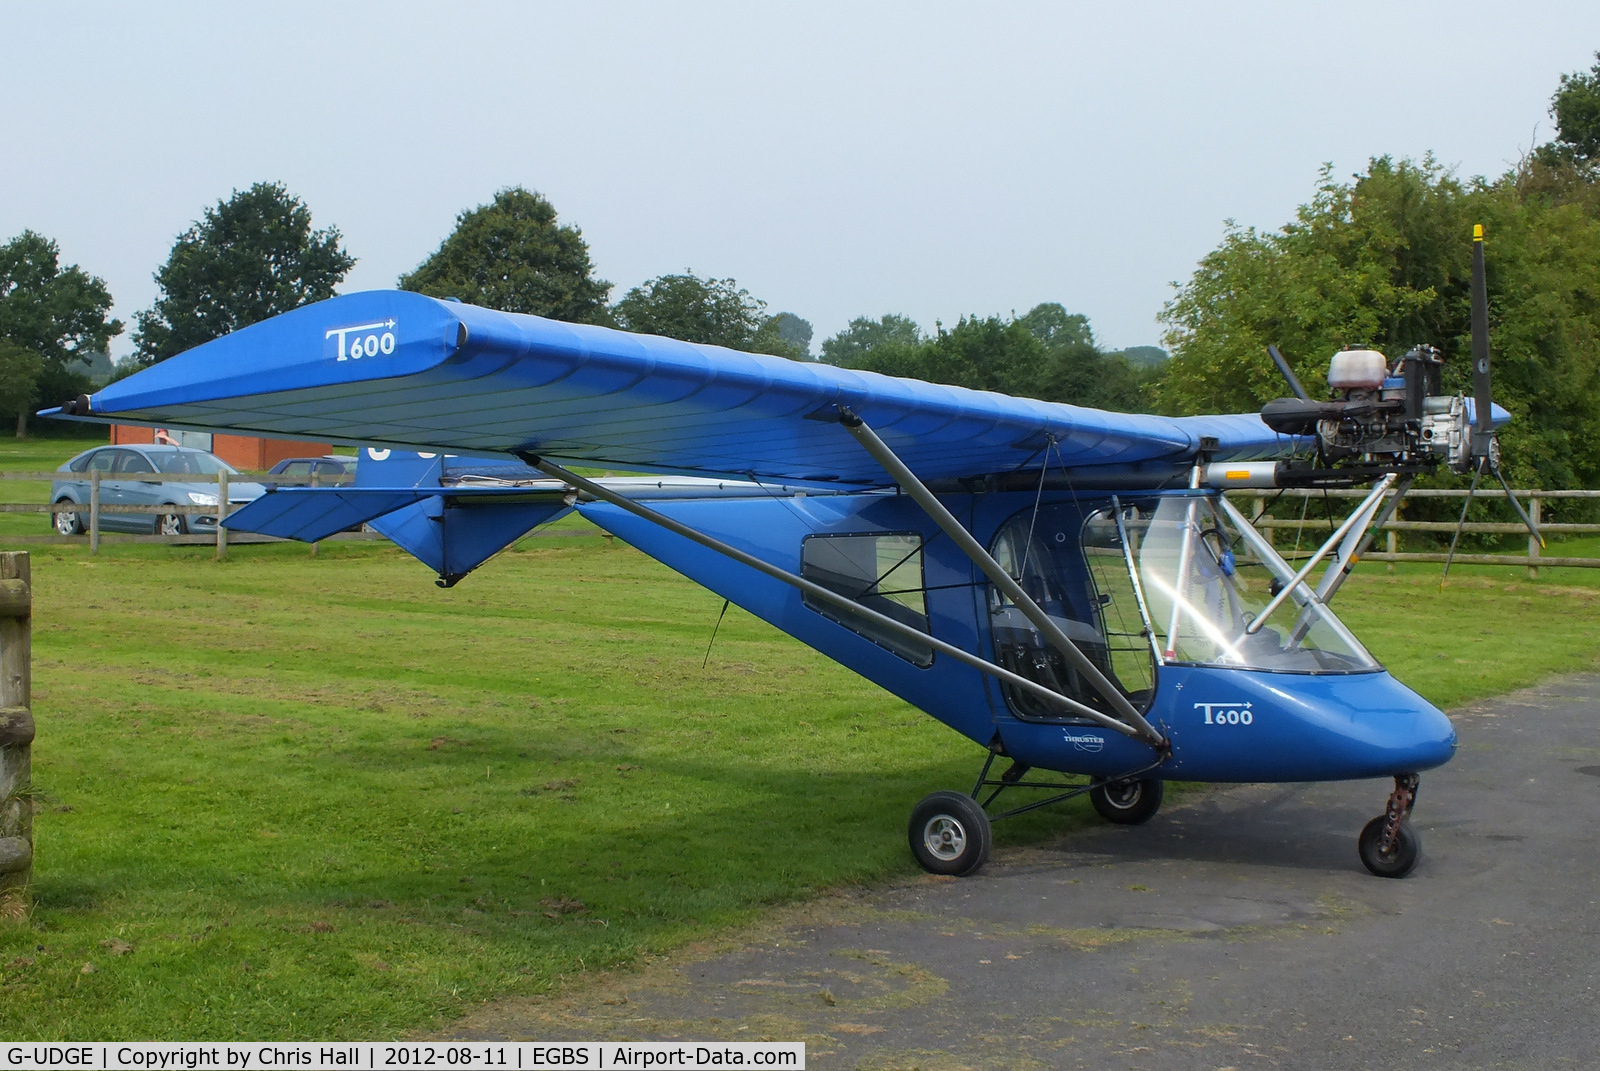 G-UDGE, 1999 Thruster T600N C/N 9099-T600N-037, at Shobdon Airfield, Herefordshire